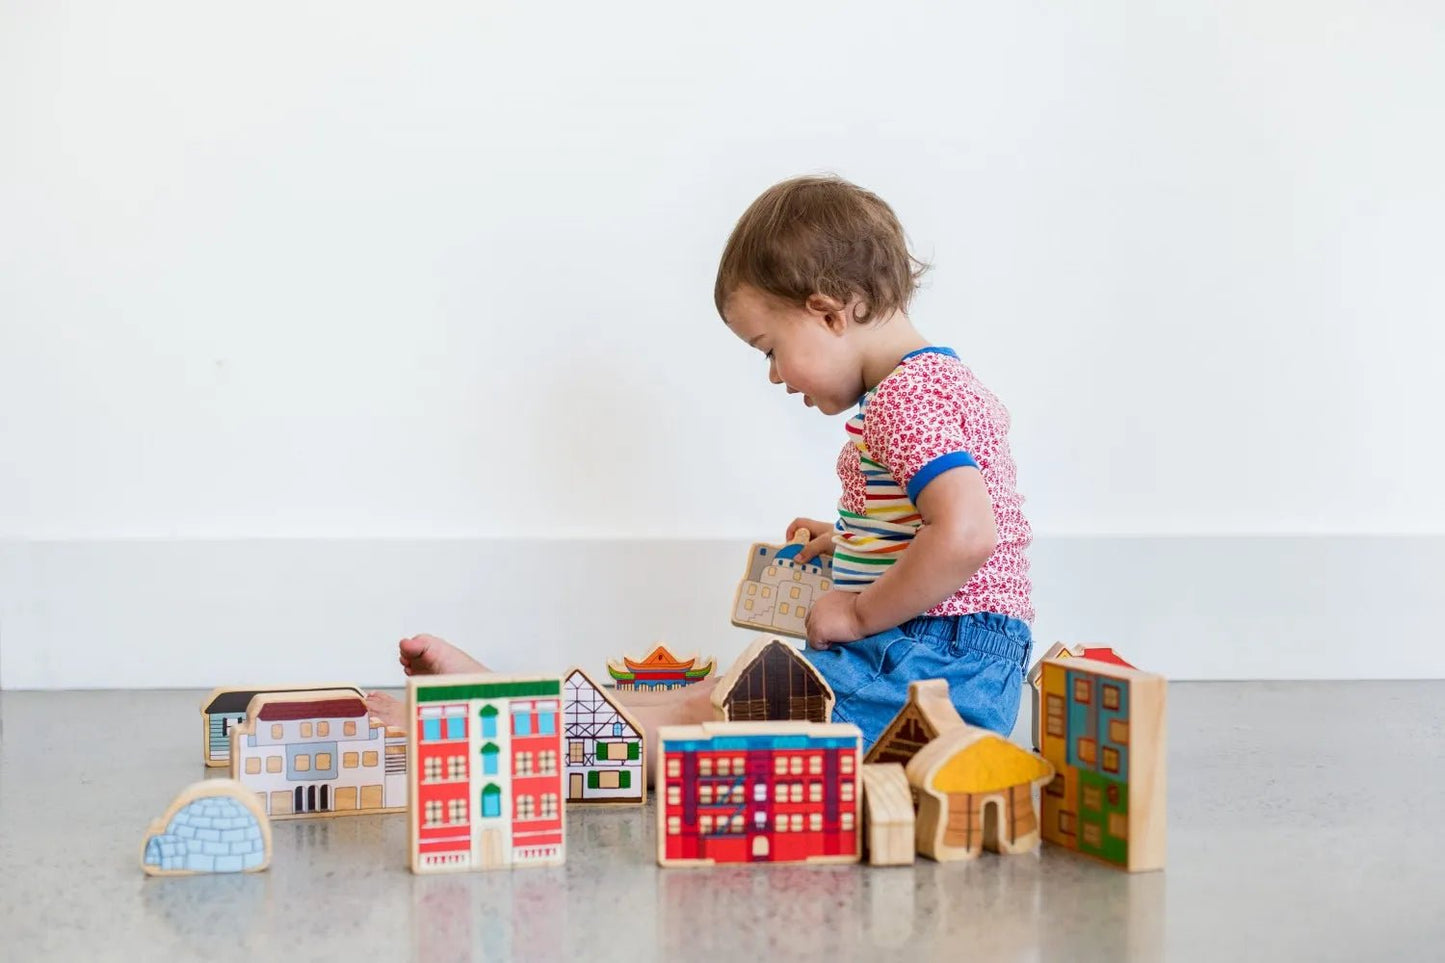 Homes Around the World | Learning and Exploring Through Play